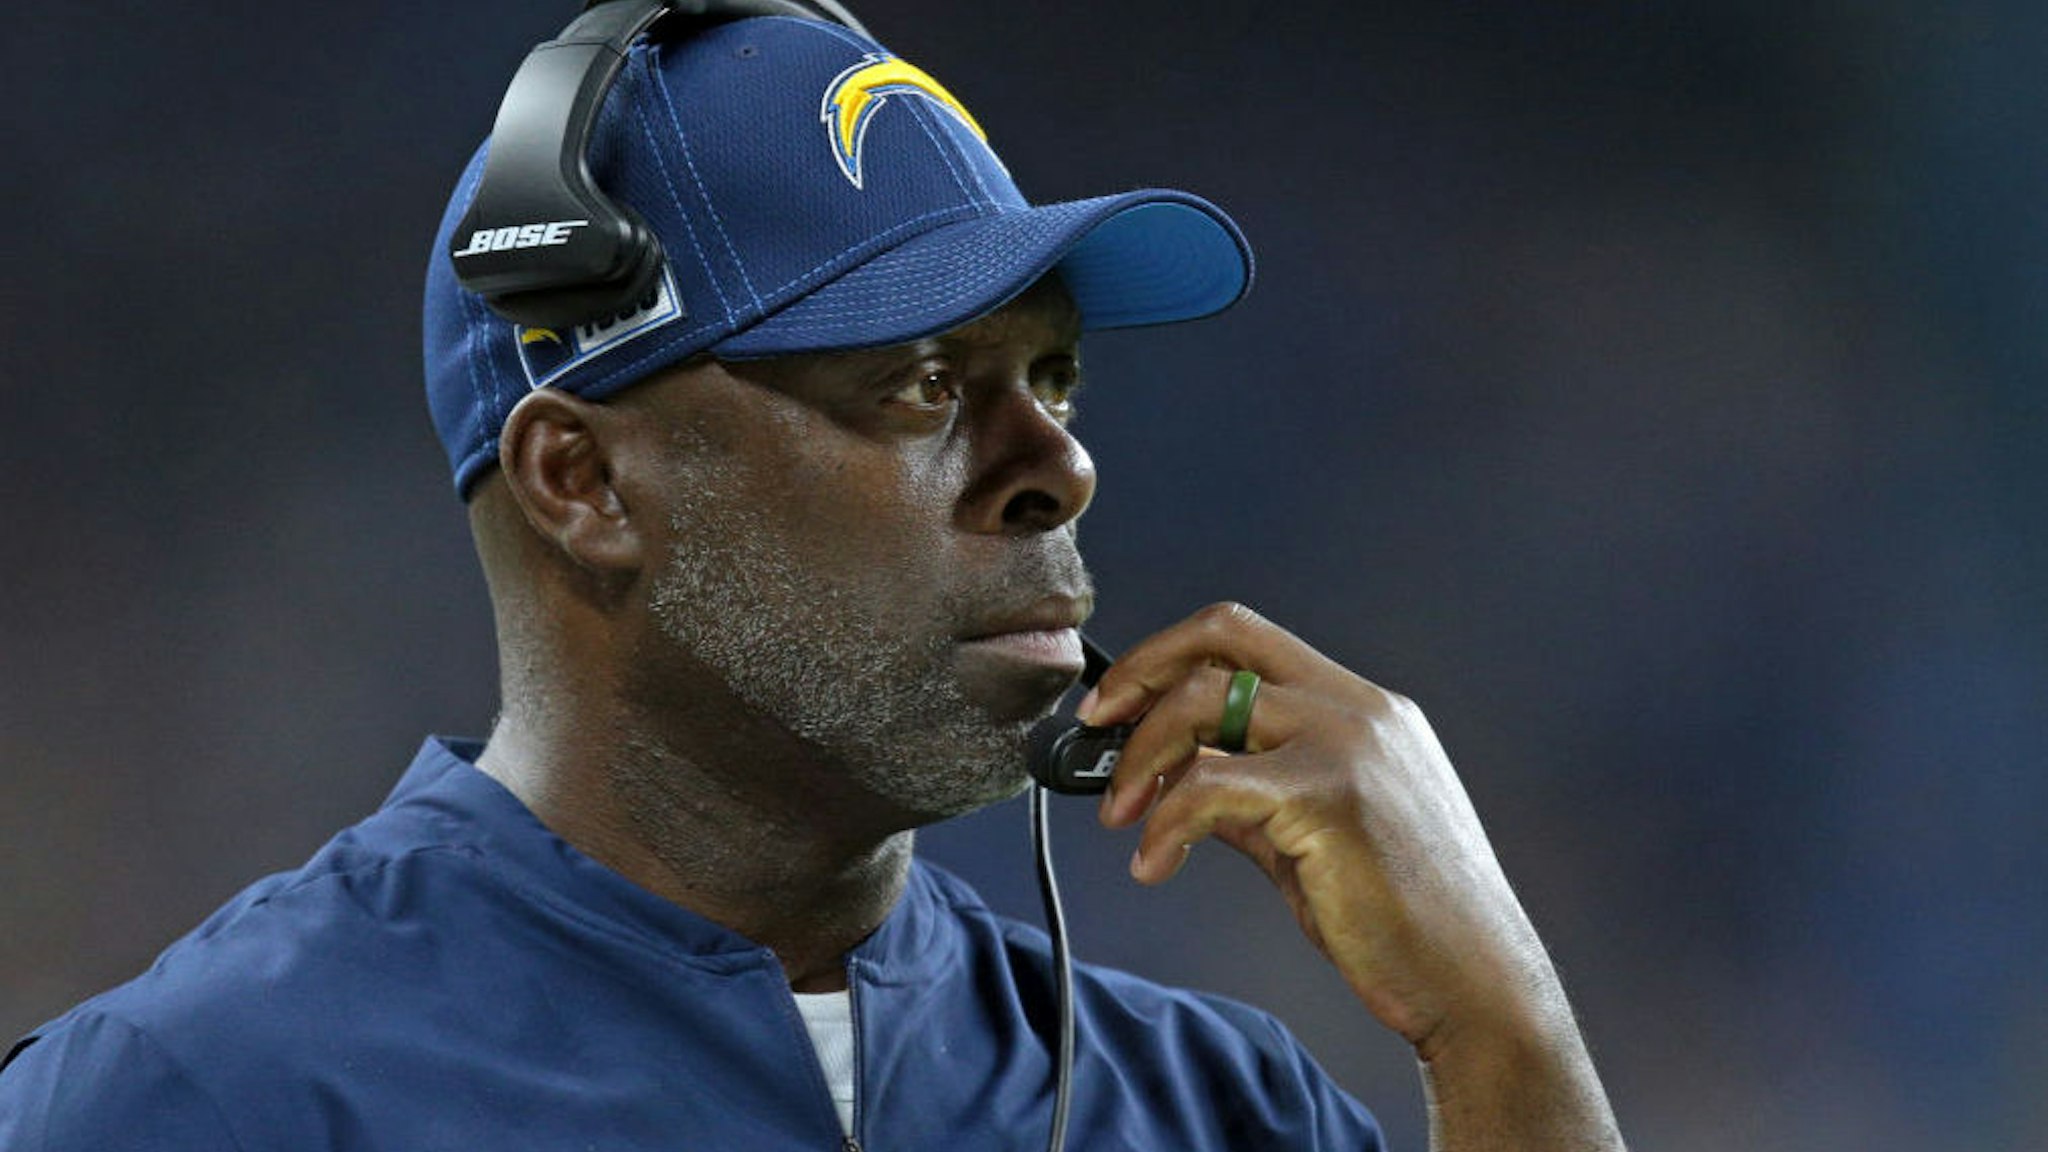 Los Angeles Chargers head coach Anthony Lynn follows the third quarter during the second half of an NFL football game against the Detroit Lions in Detroit, Michigan USA, on Sunday, September 15, 2019